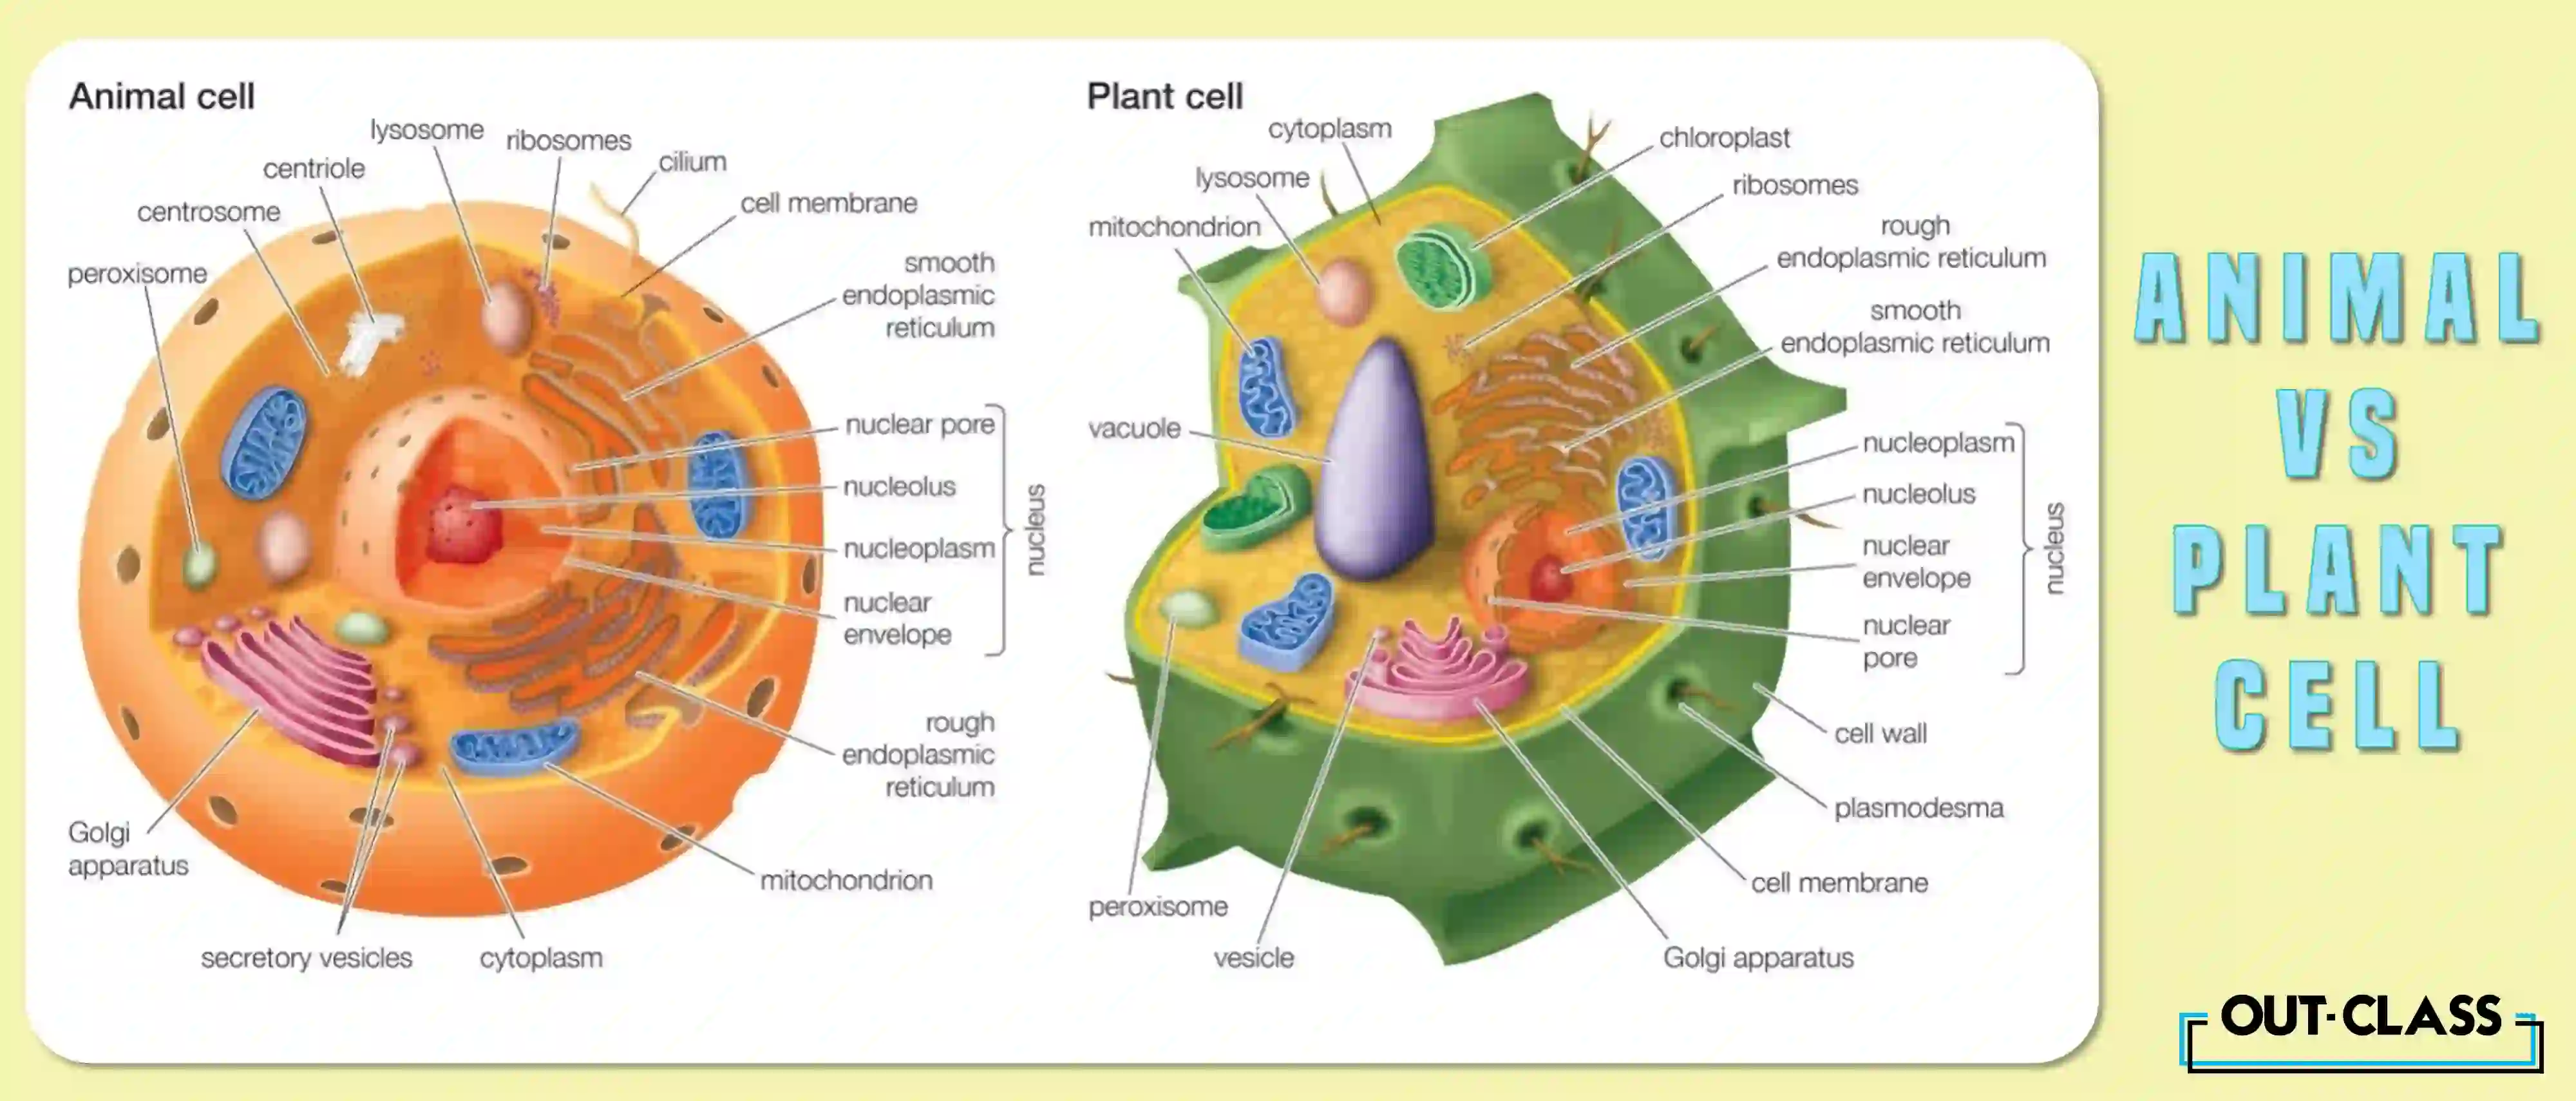 A plant cell is characterized by a rigid cell wall, chloroplasts containing chlorophyll, and a large central vacuole. Contrastingly, an animal cell, a staple in IGCSE and O Level Biology, lacks a cell wall but possesses a flexible cell membrane. Instead of chloroplasts, animal cells house mitochondria, the powerhouse responsible for energy production.